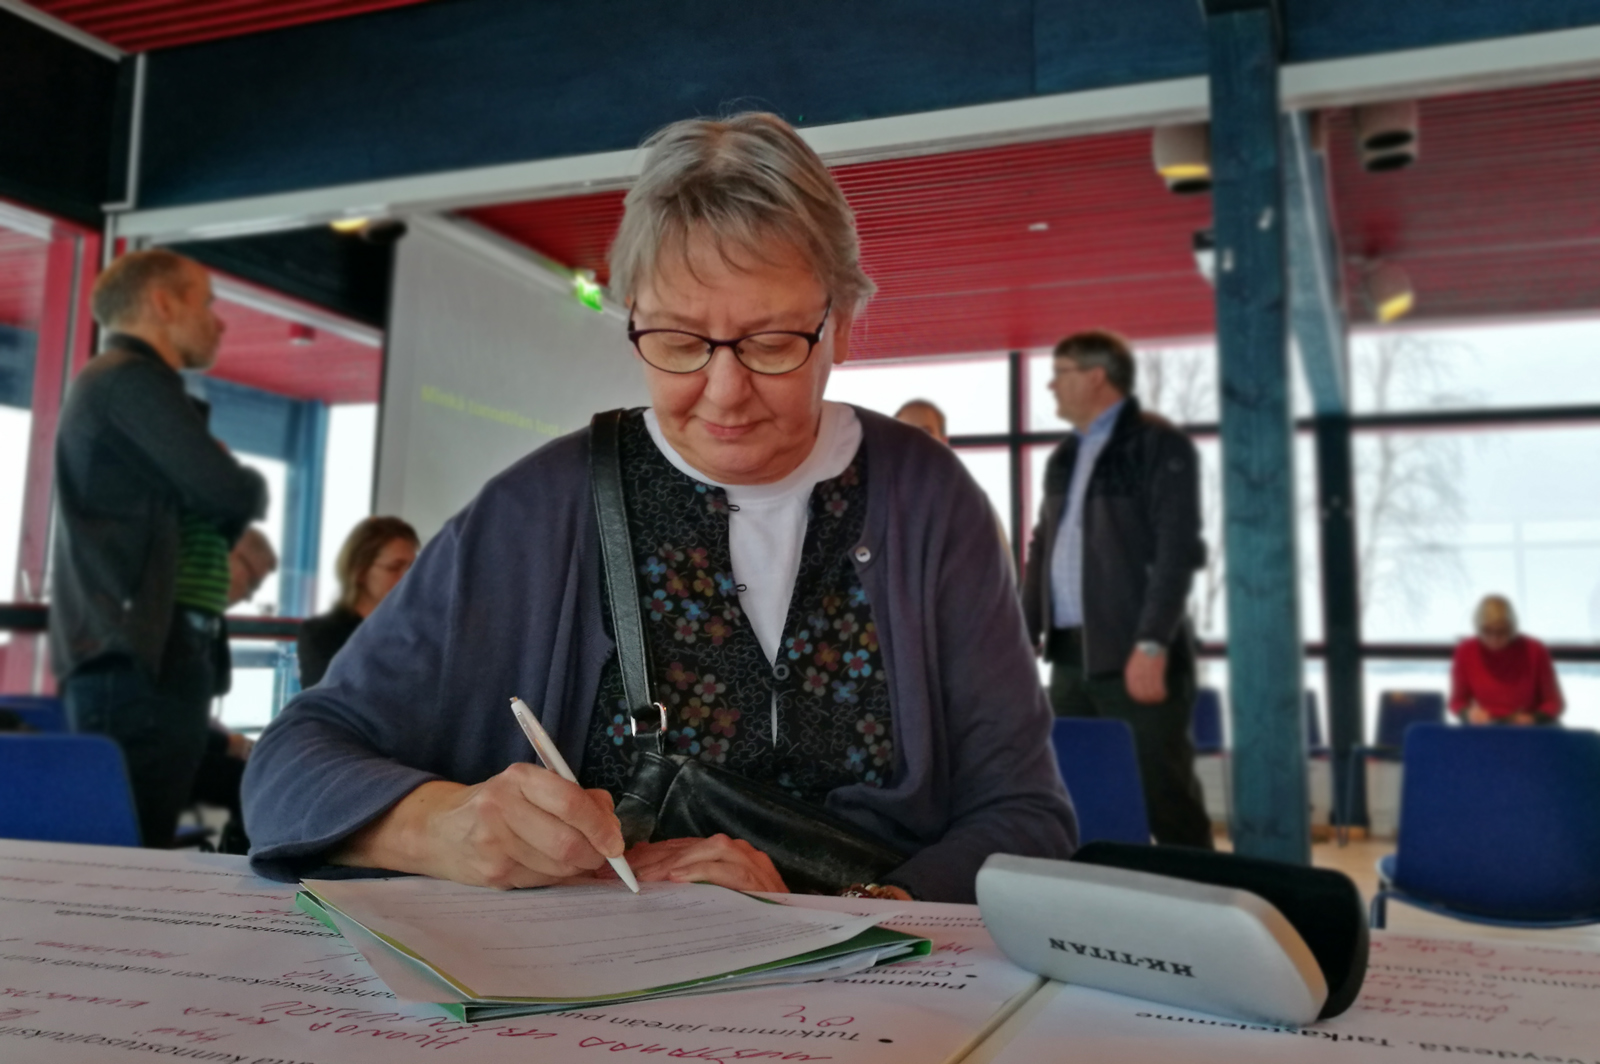 ”The methods of stakeholder cooperation have improved. As long as you voice your comments, your ideas will be included. Viewpoints are not censored during the workshops and they are not watered down by a demand for consensus. Still, what is included in the final plan will naturally be decided by Metsähallitus,” says Merja Ylönen, Chief of the Northern Ostrobothnia District of the Finnish Association for Nature Conservation. Photo: Anna Kauppi